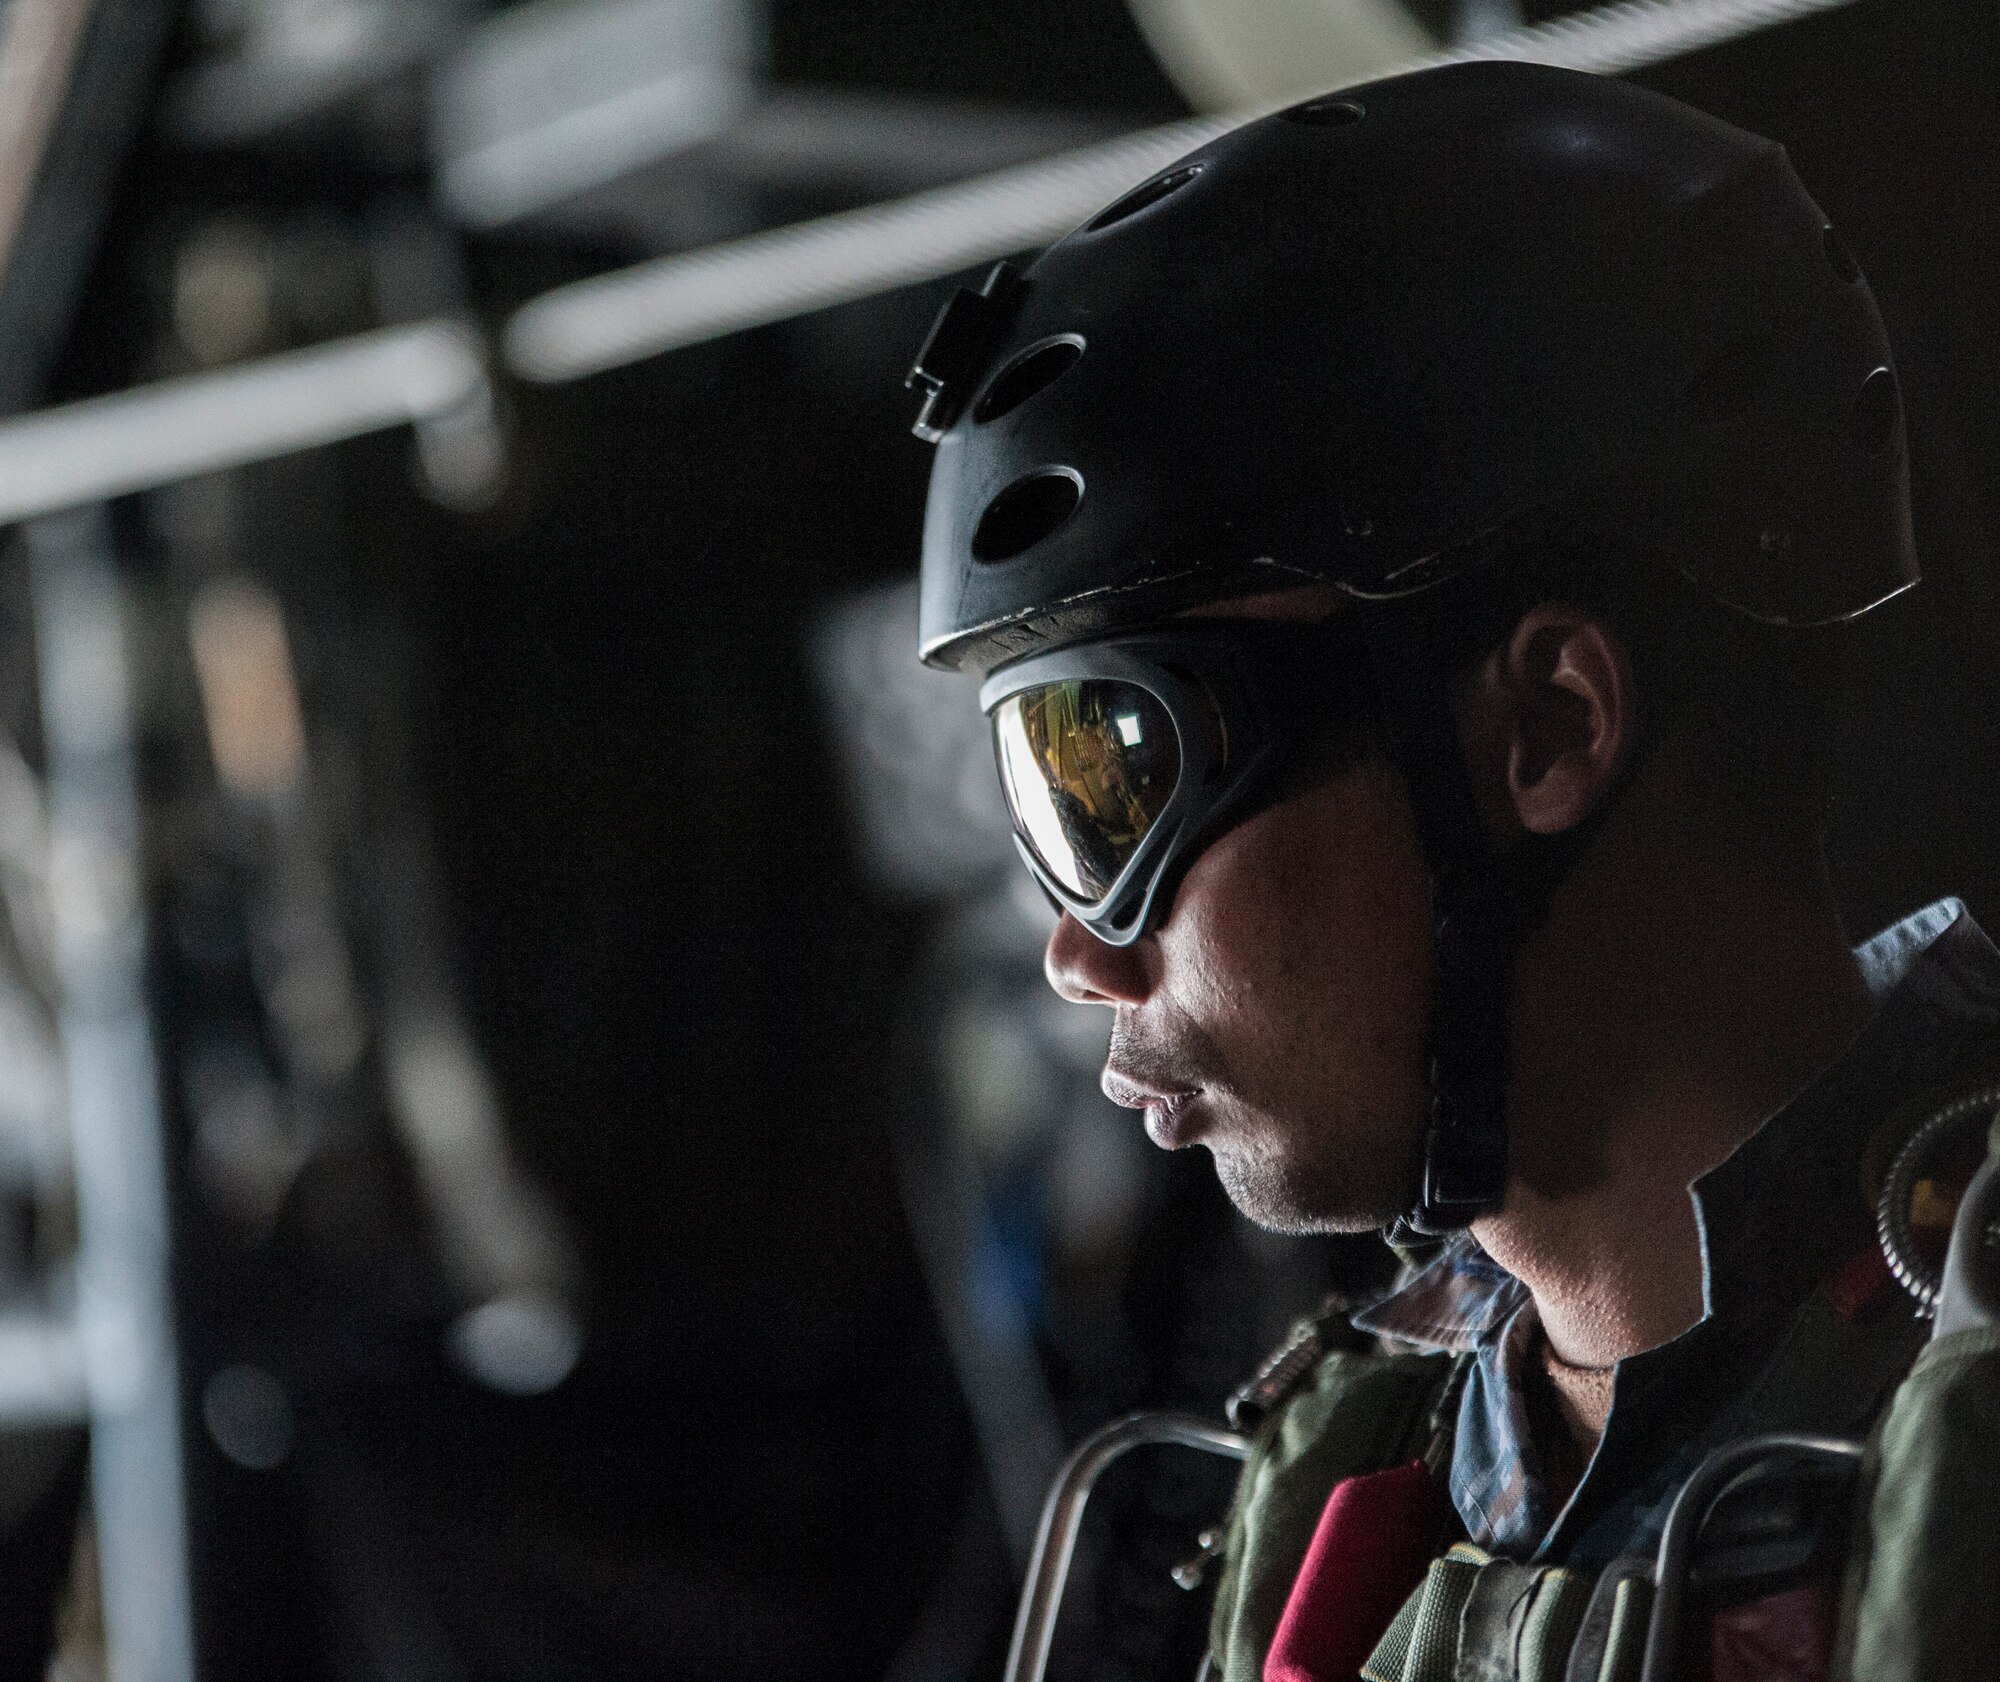 320th STS conducts military free fall with Thai partners